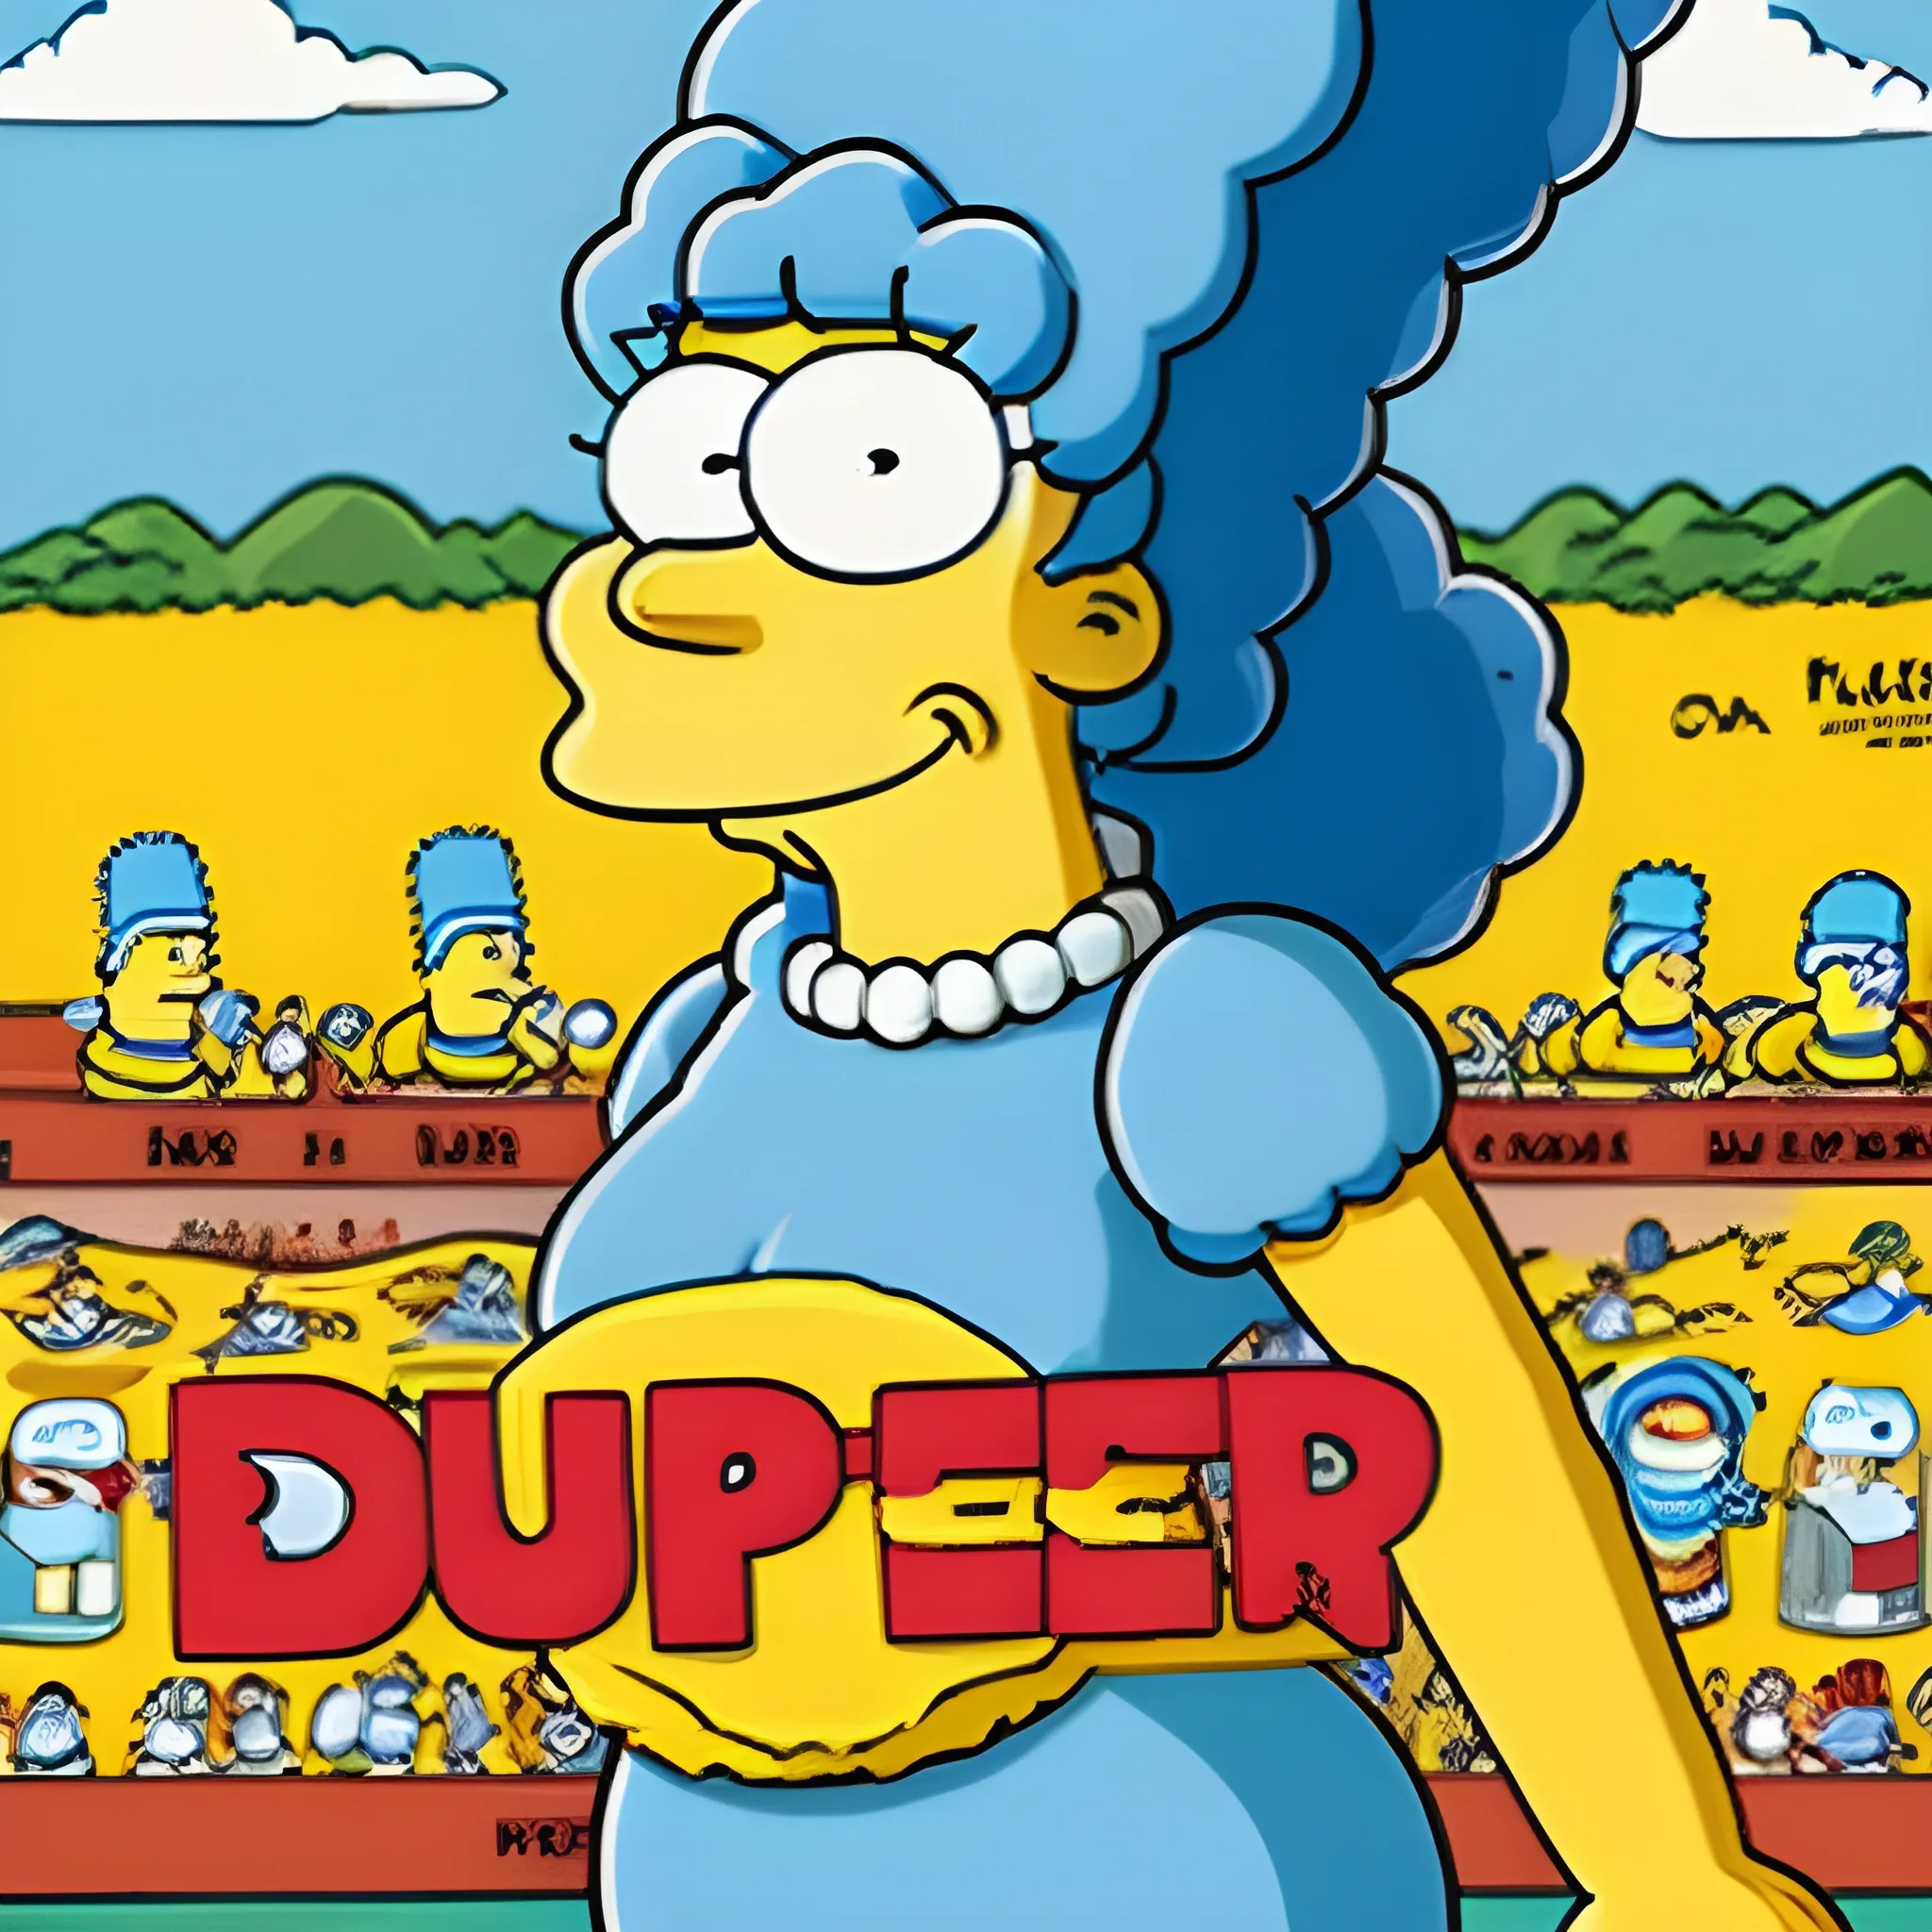 Marge Simpson from The Simpsons on a landscape-format banner ad promoting Duff Beer. Drawn in typical style of Matt Groening's Simpsons